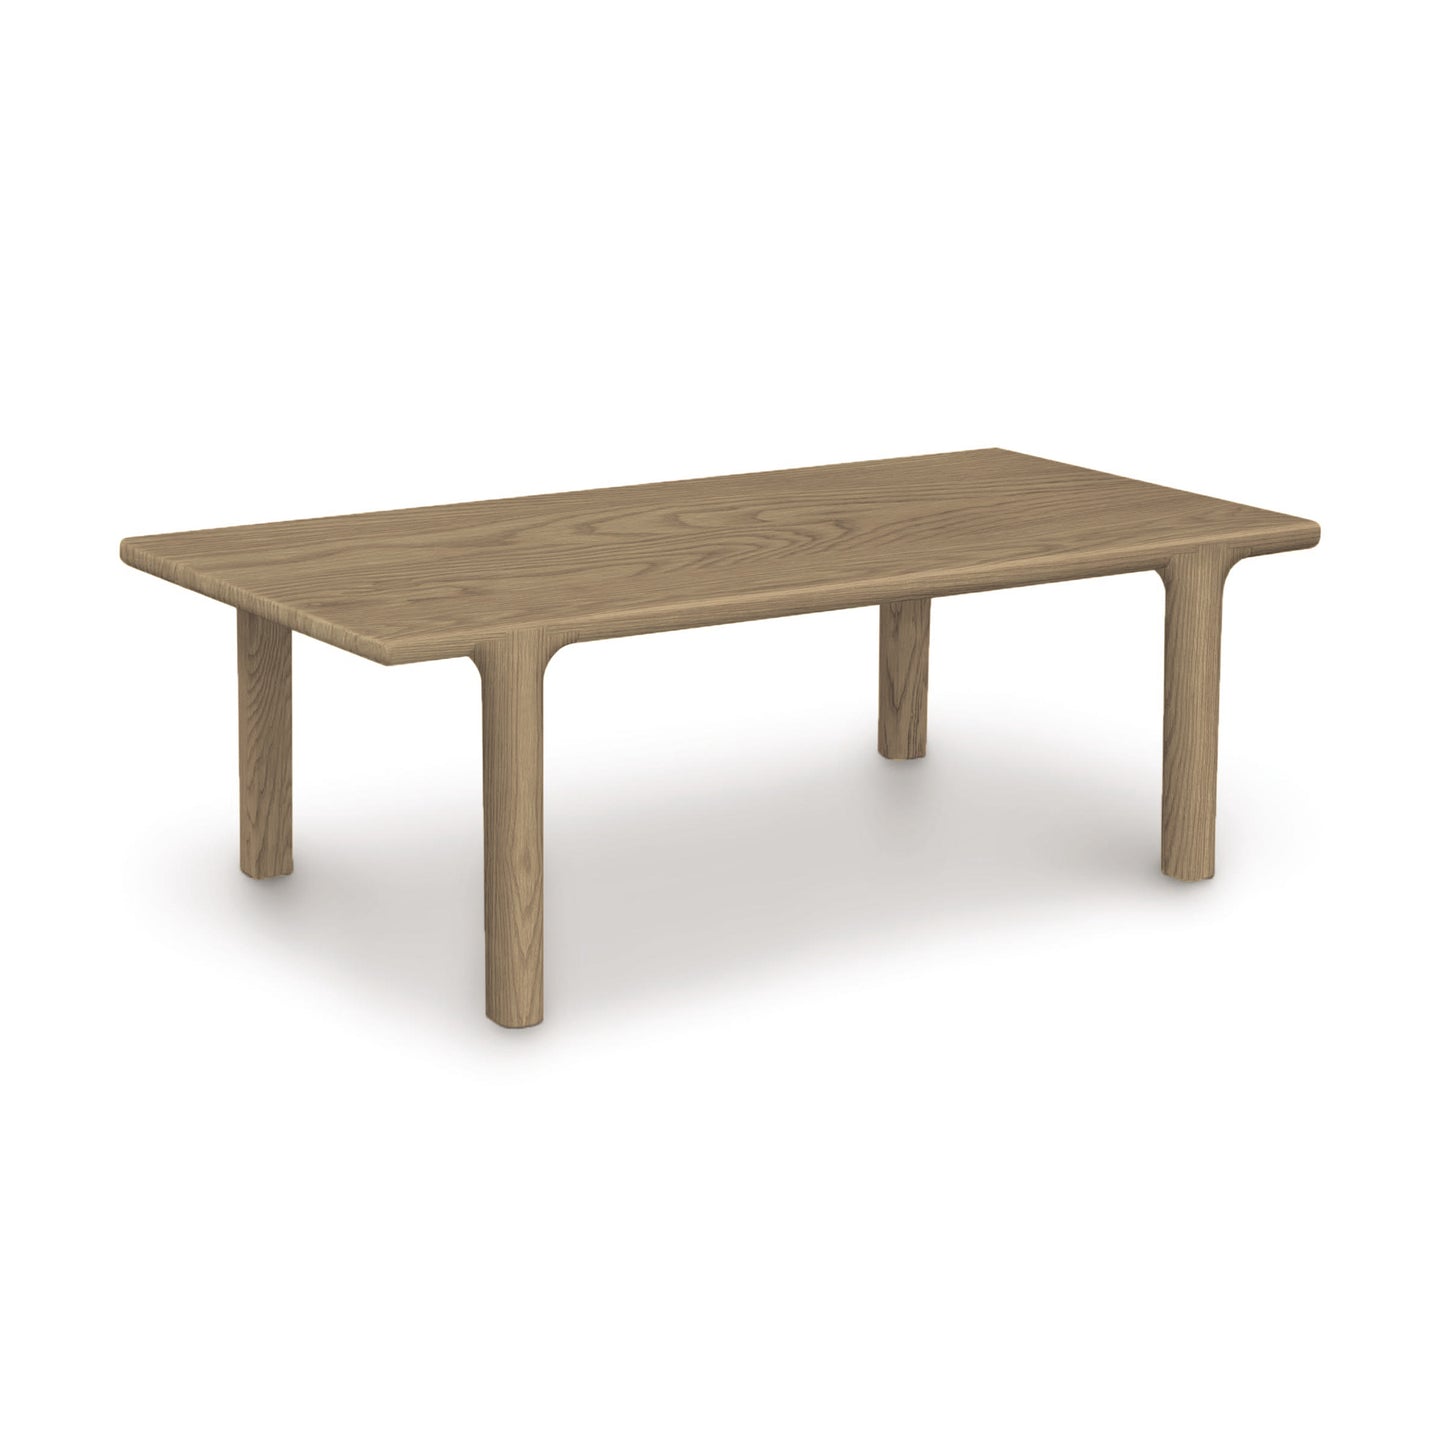 A simple Copeland Furniture Sierra Rectangular Coffee Table made from solid North American hardwood, with four legs, placed against a white background.